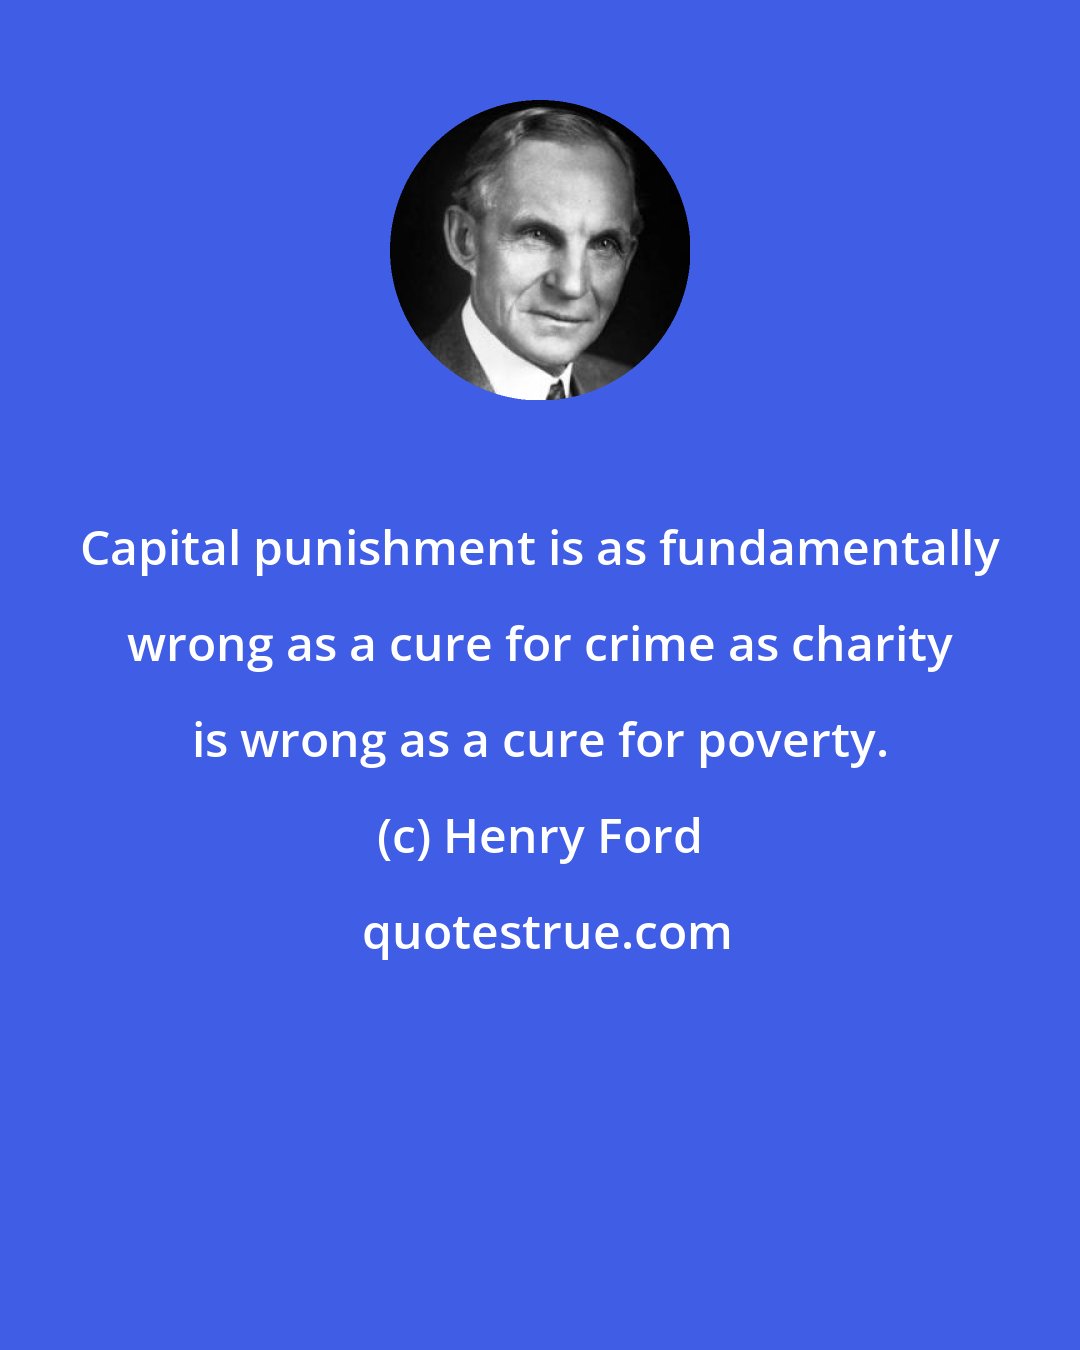 Henry Ford: Capital punishment is as fundamentally wrong as a cure for crime as charity is wrong as a cure for poverty.